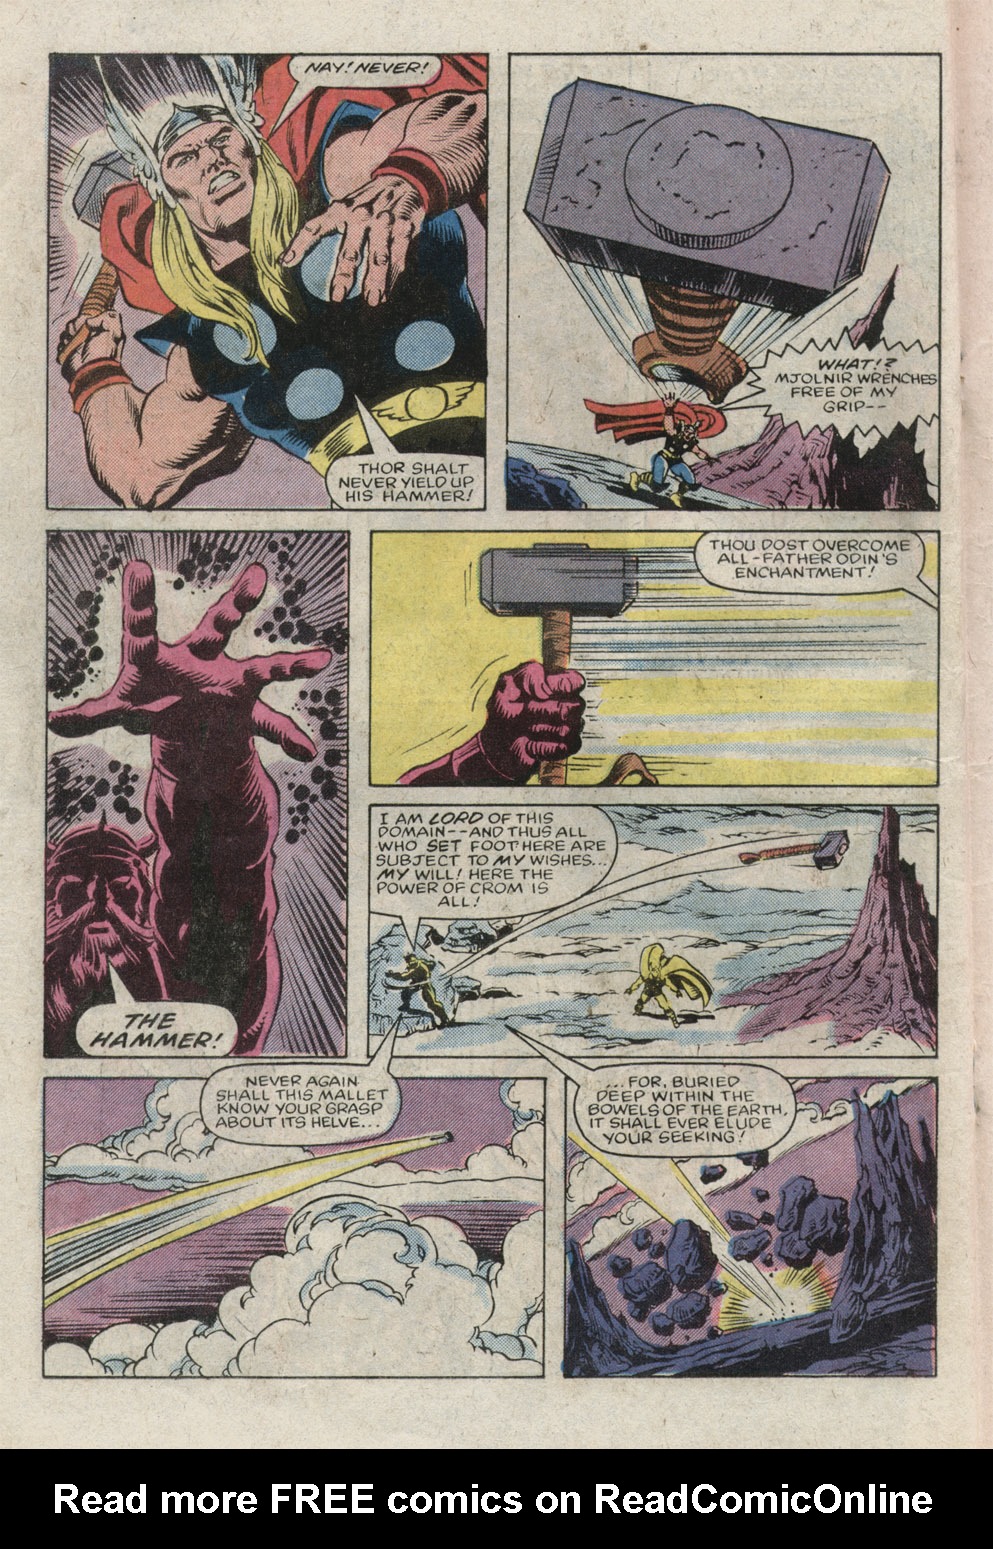 What If? (1977) issue 39 - Thor battled conan - Page 26